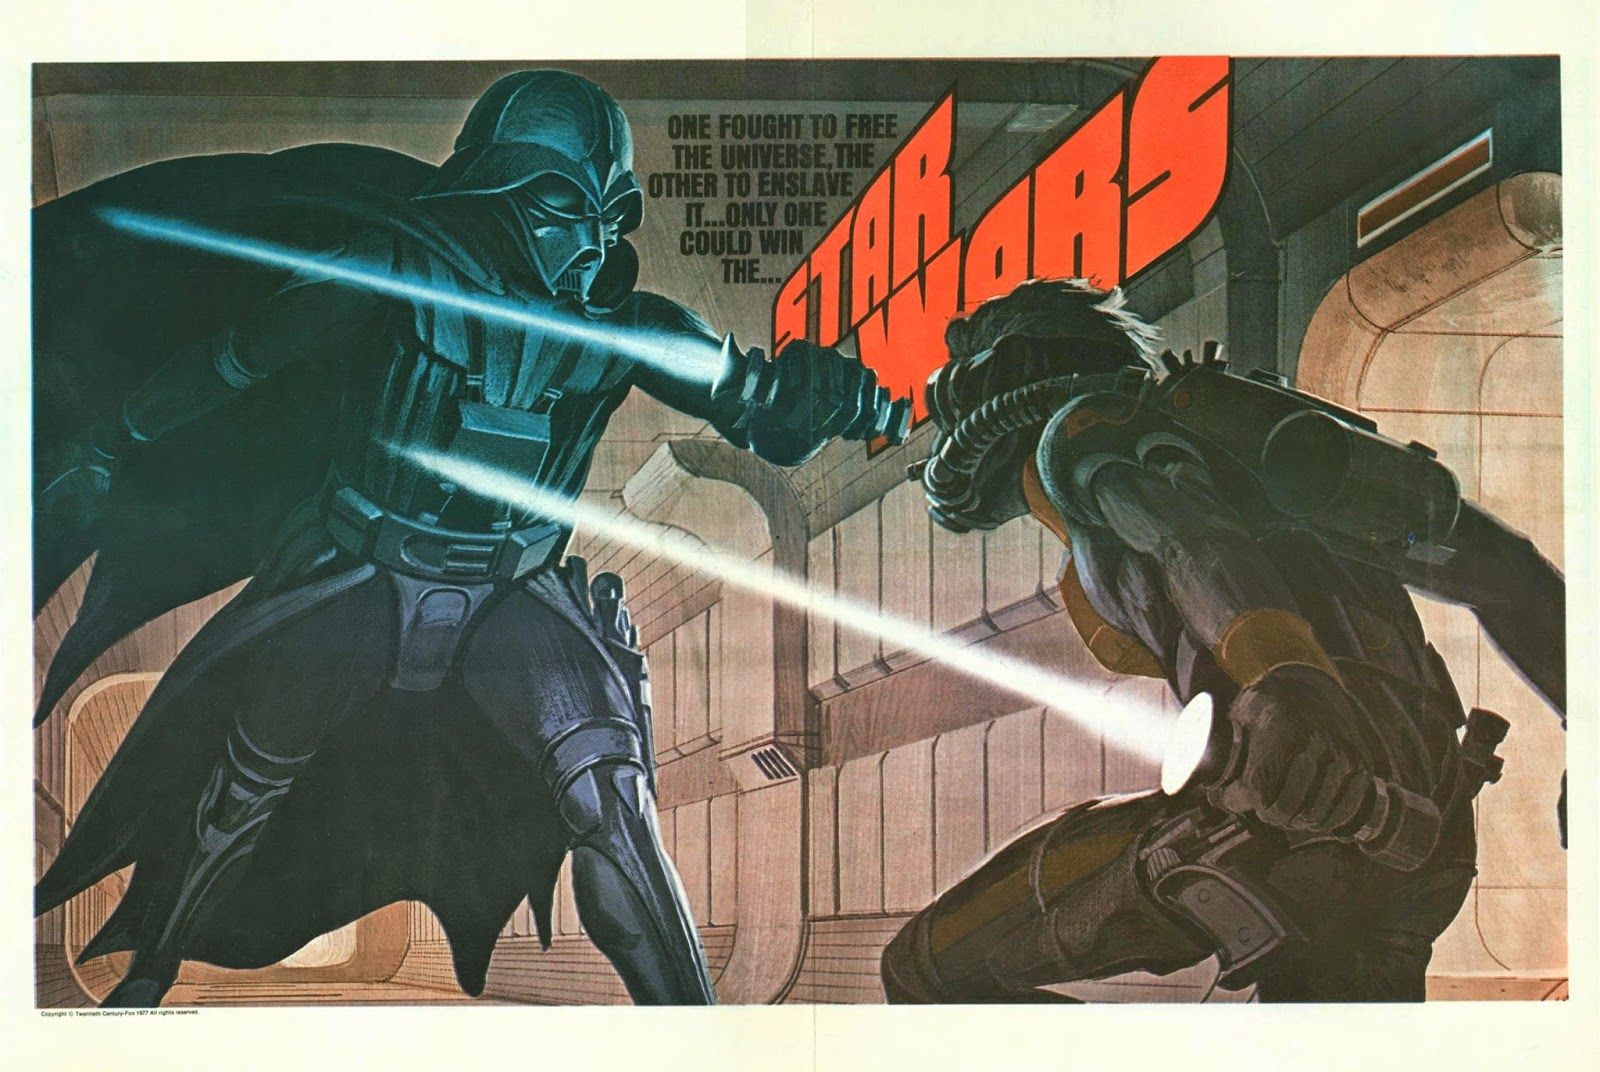 Darth Vader and Luke Skywalker battle with lightsabers in Ralph McQuarrie's early concept art for 'Star Wars.'